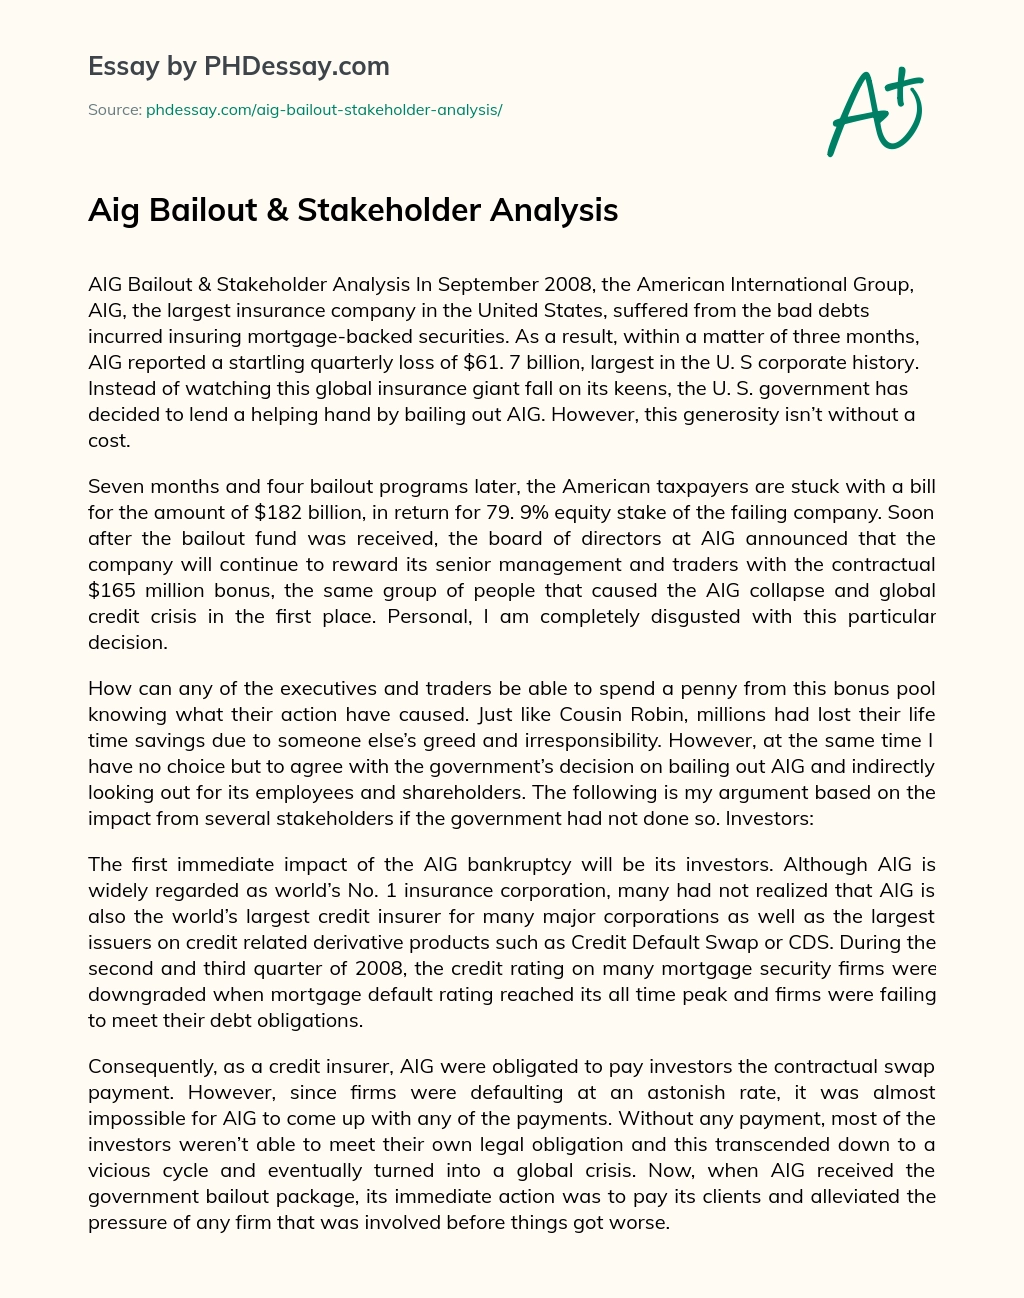 Aig Bailout & Stakeholder Analysis essay